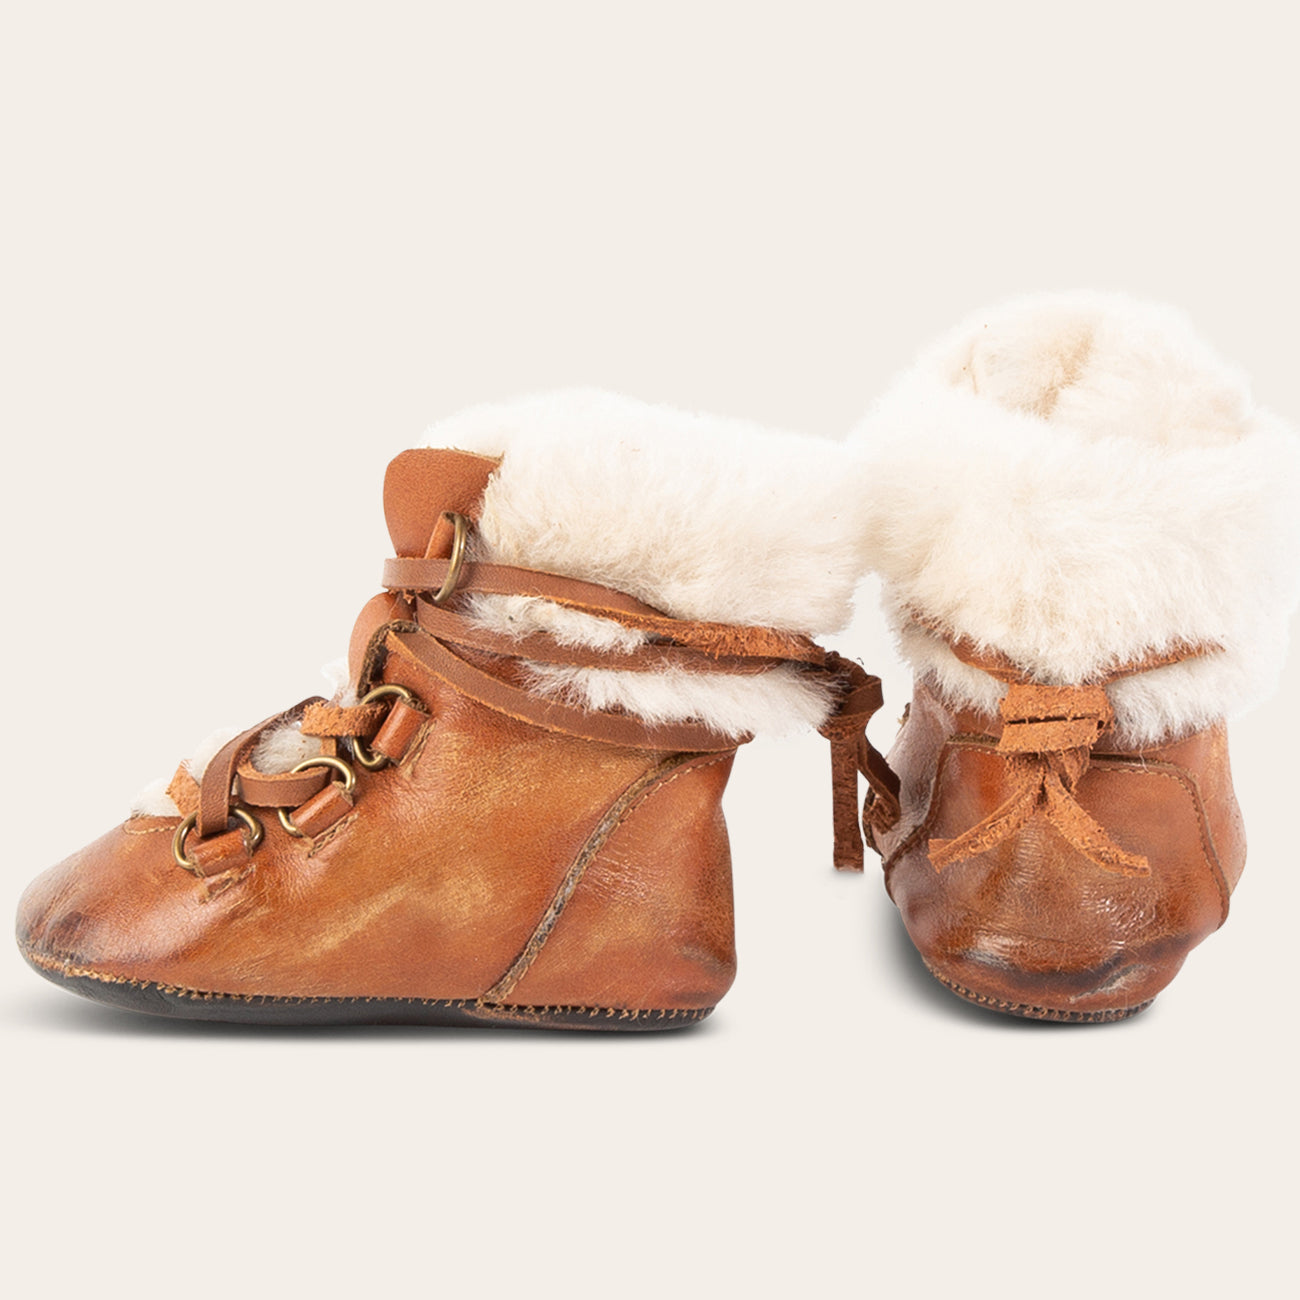 side and back view showing shearling lining and contrasting leather lace detailing on FREEBIRD infant baby Norway cognac leather bootie